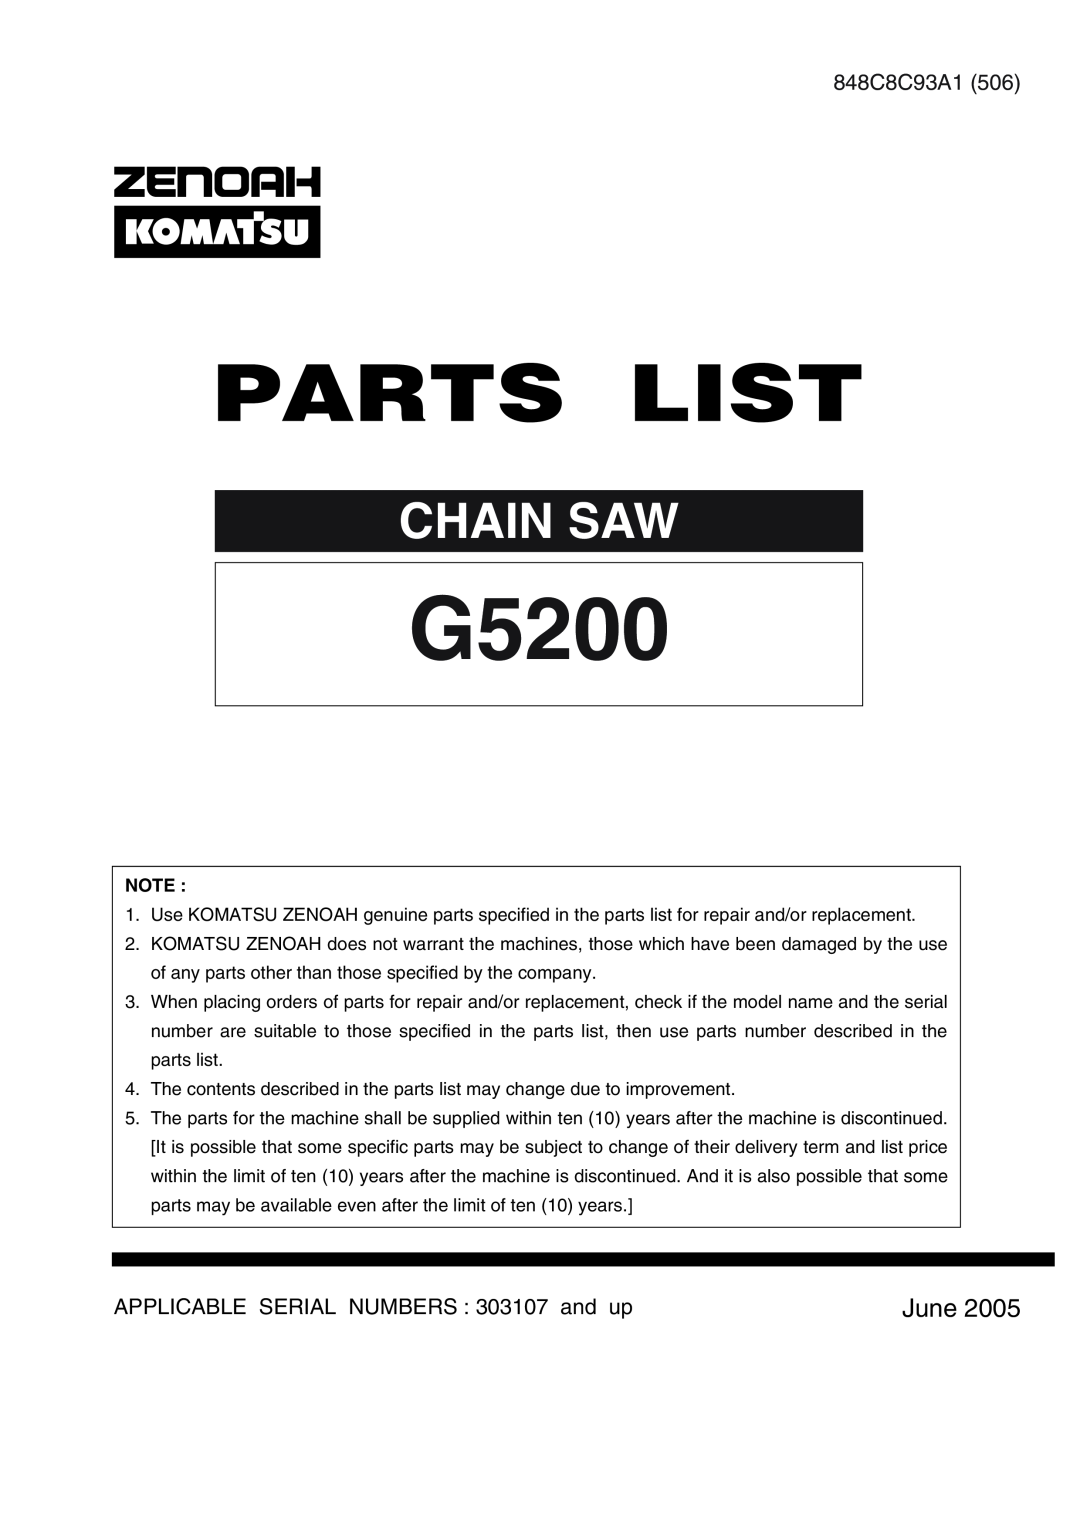 Zenoah G5200 manual Chain Saw, June, 848C8C93A1, APPLICABLE SERIAL NUMBERS 303107 and up 